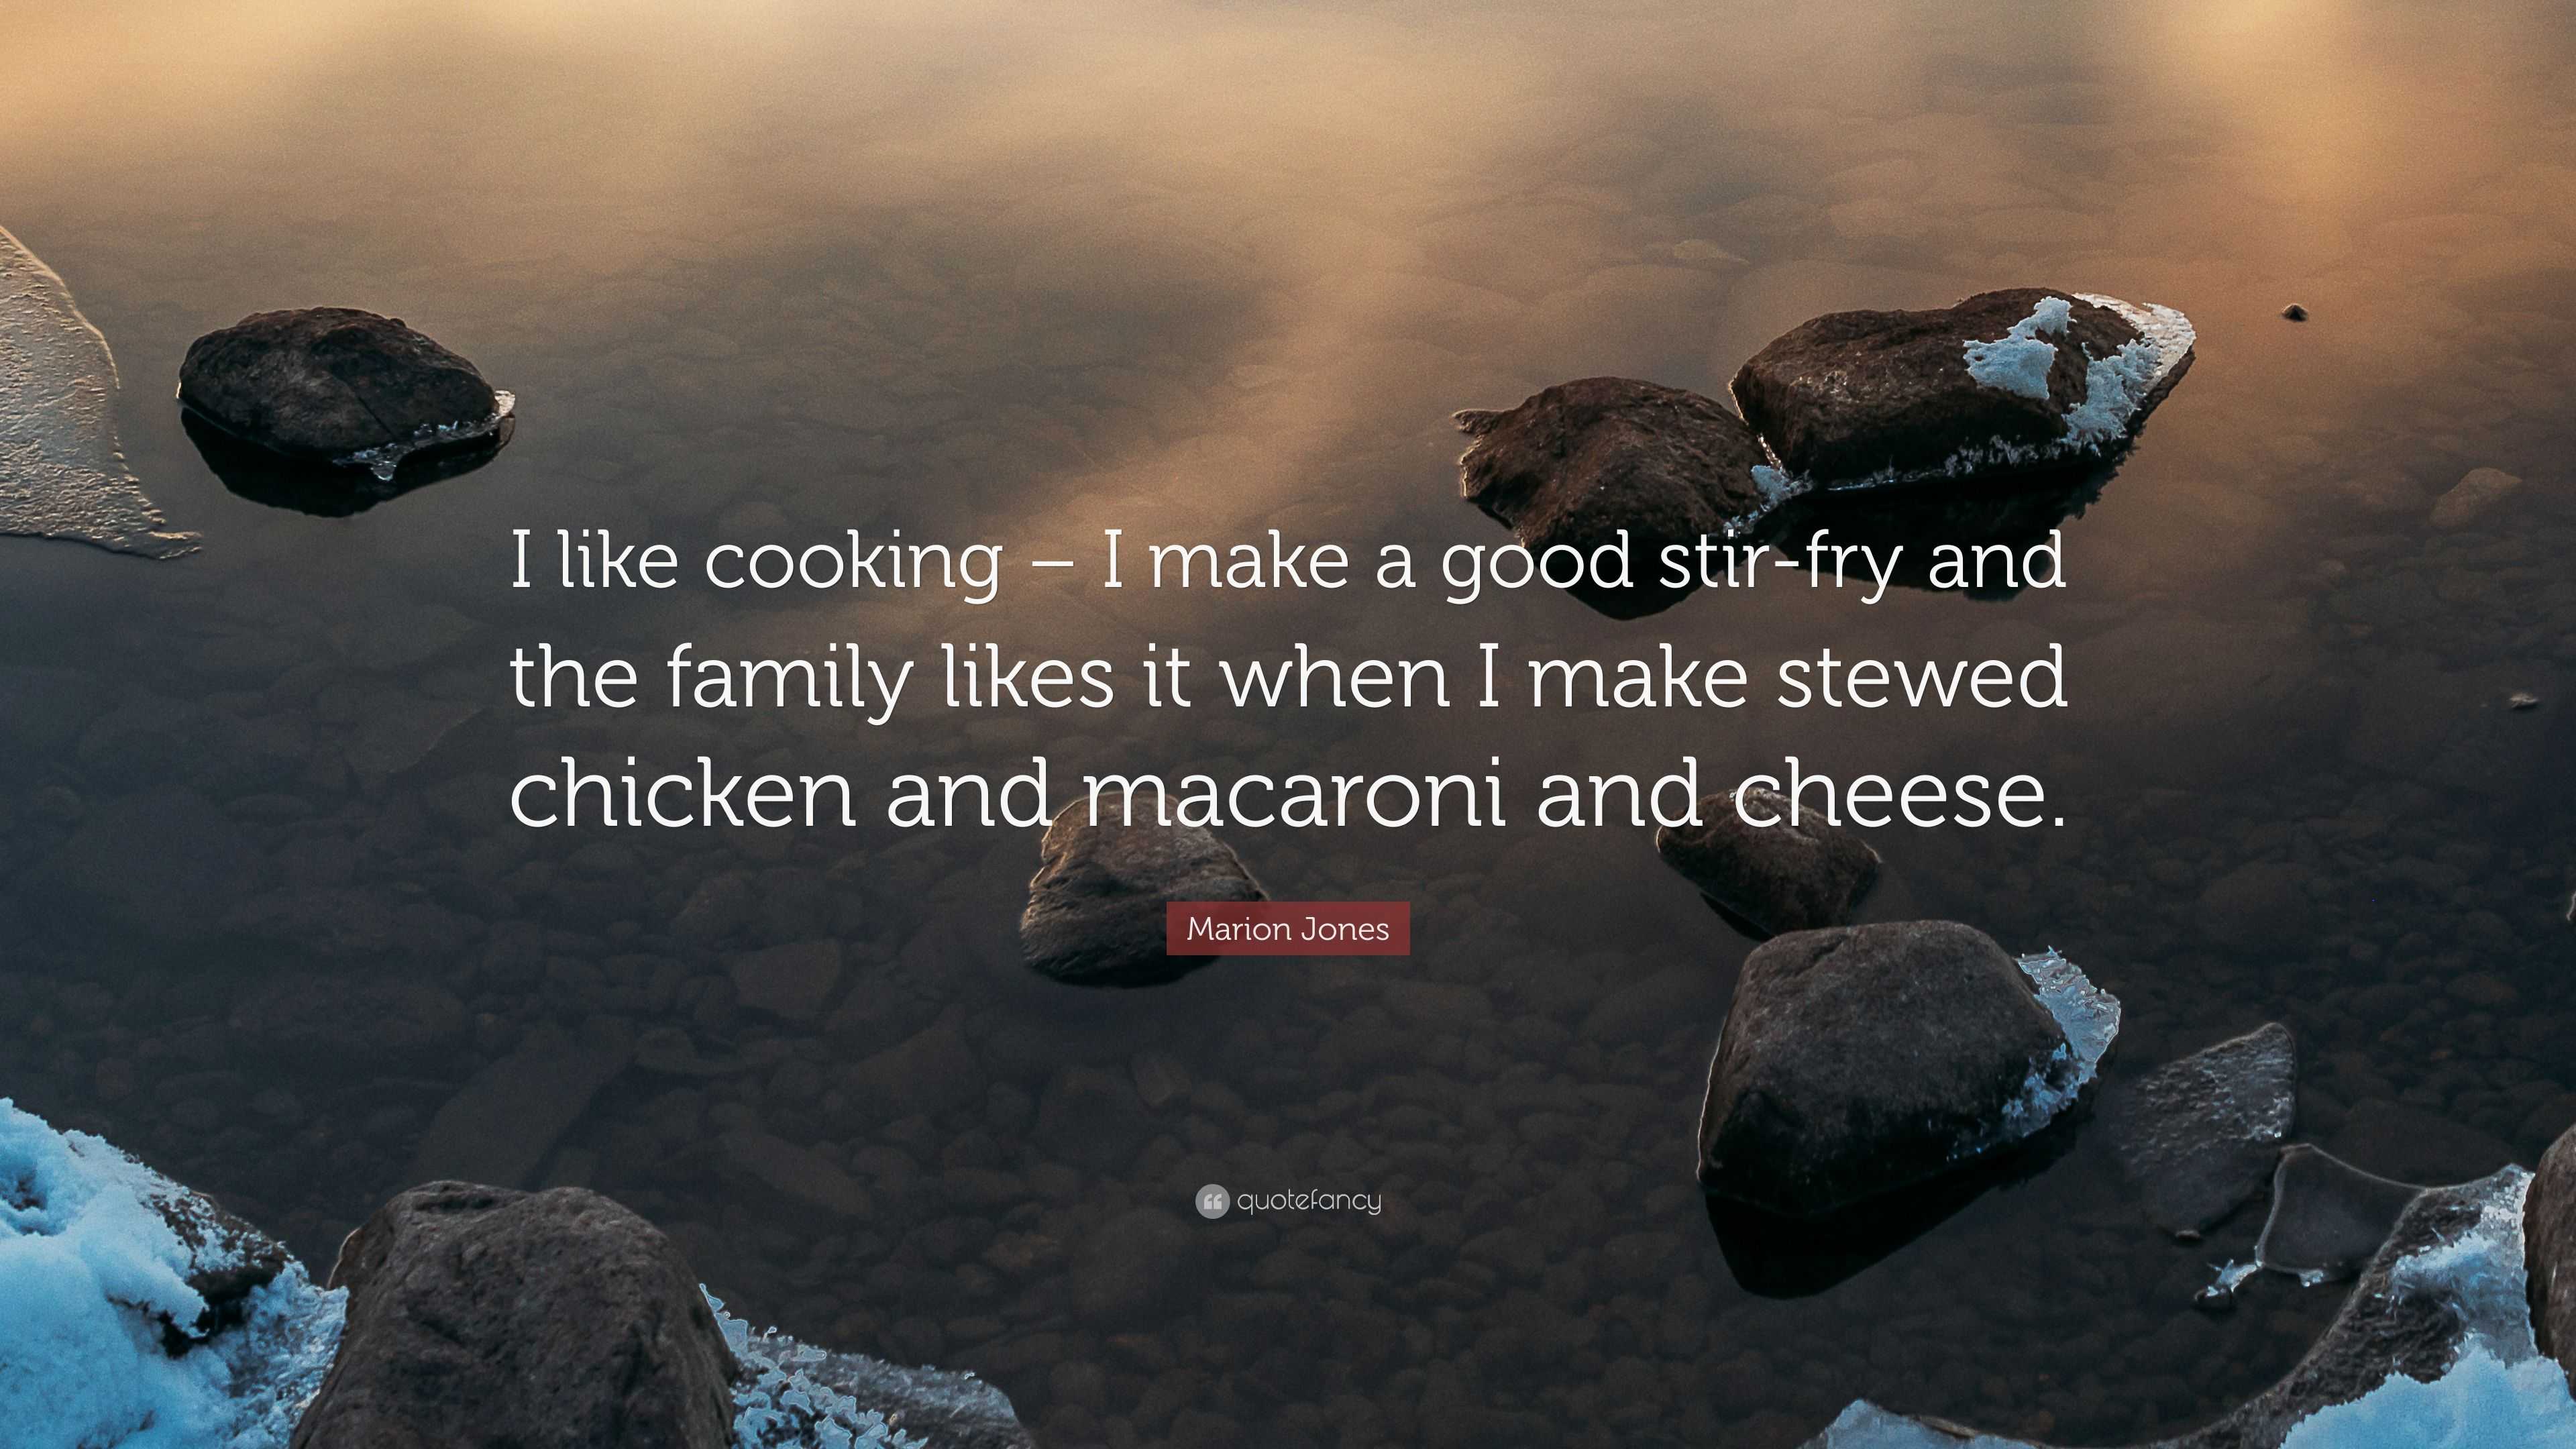 https://quotefancy.com/media/wallpaper/3840x2160/4128246-Marion-Jones-Quote-I-like-cooking-I-make-a-good-stir-fry-and-the.jpg